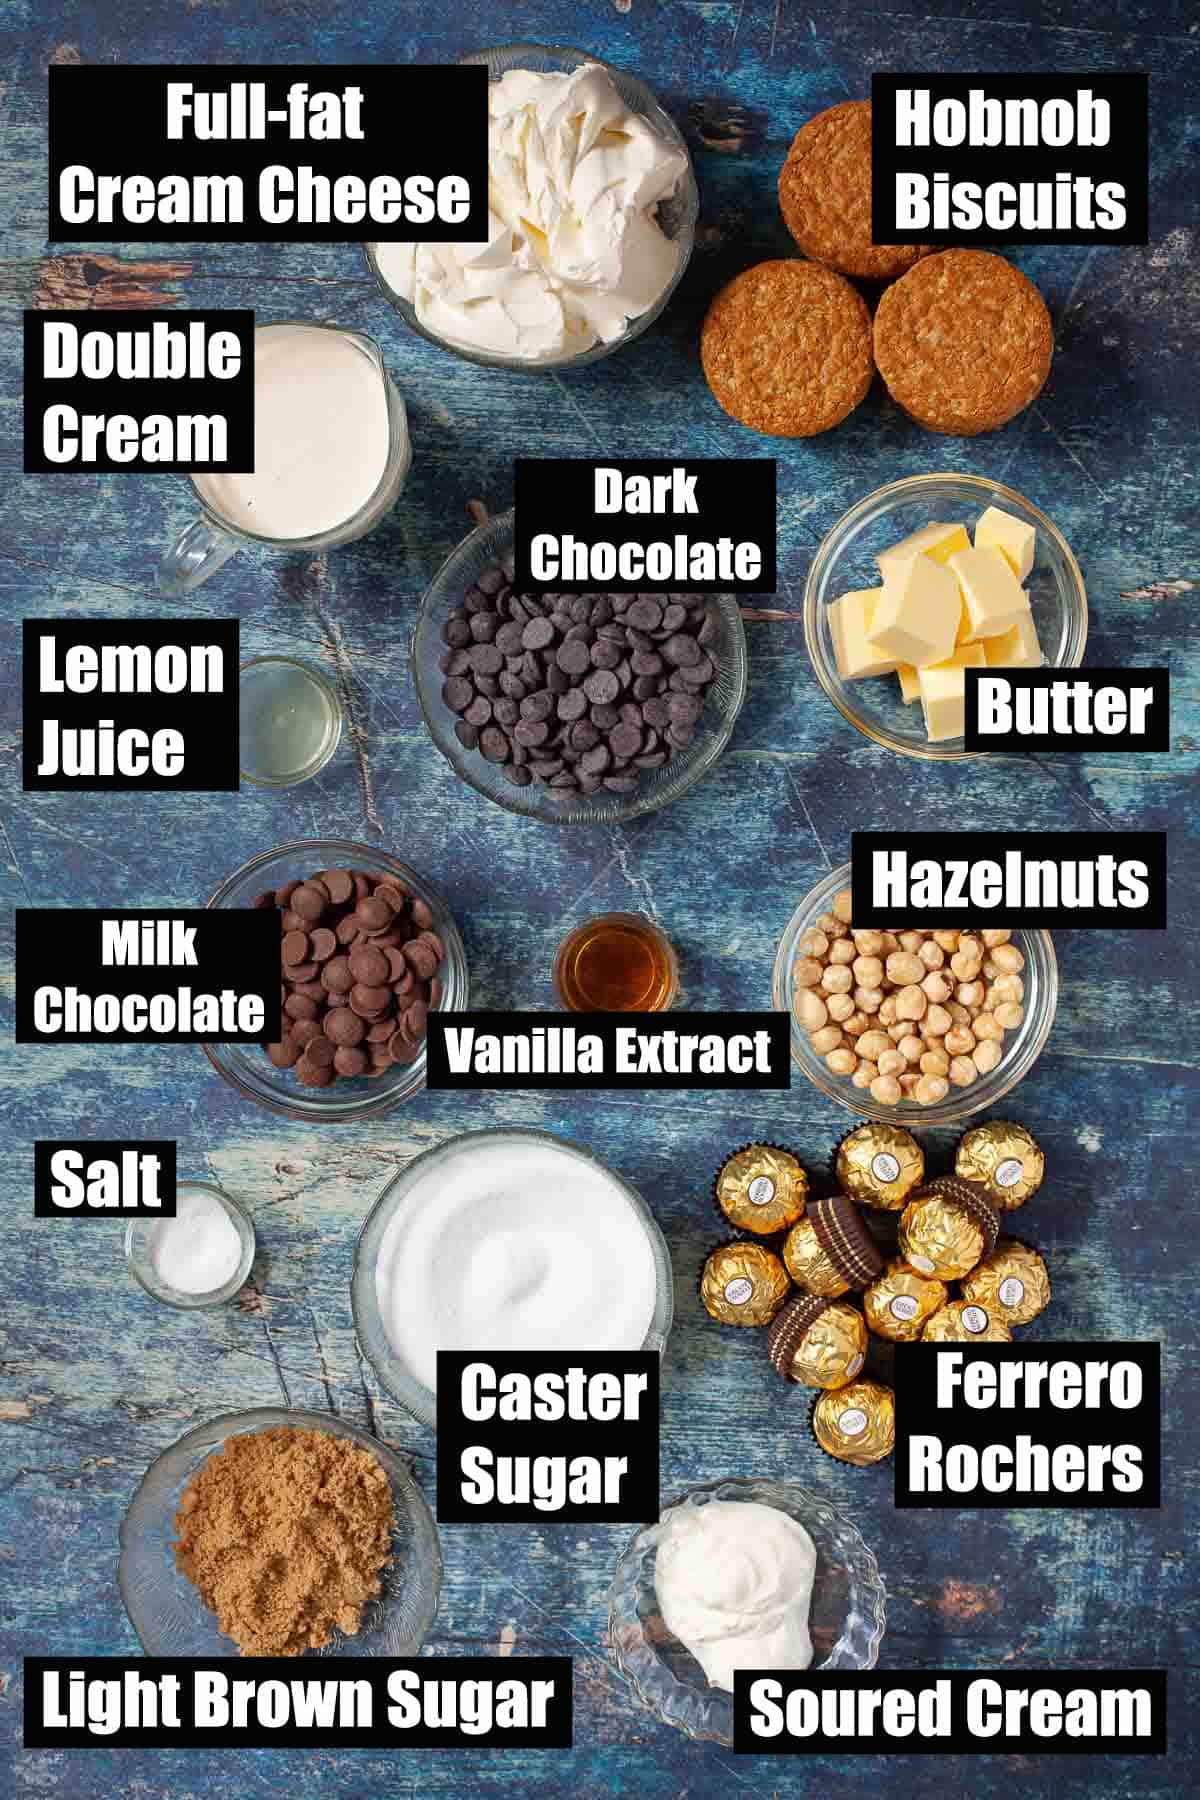 Ingredients for a chocolate and hazelnut dessert with text overlay.